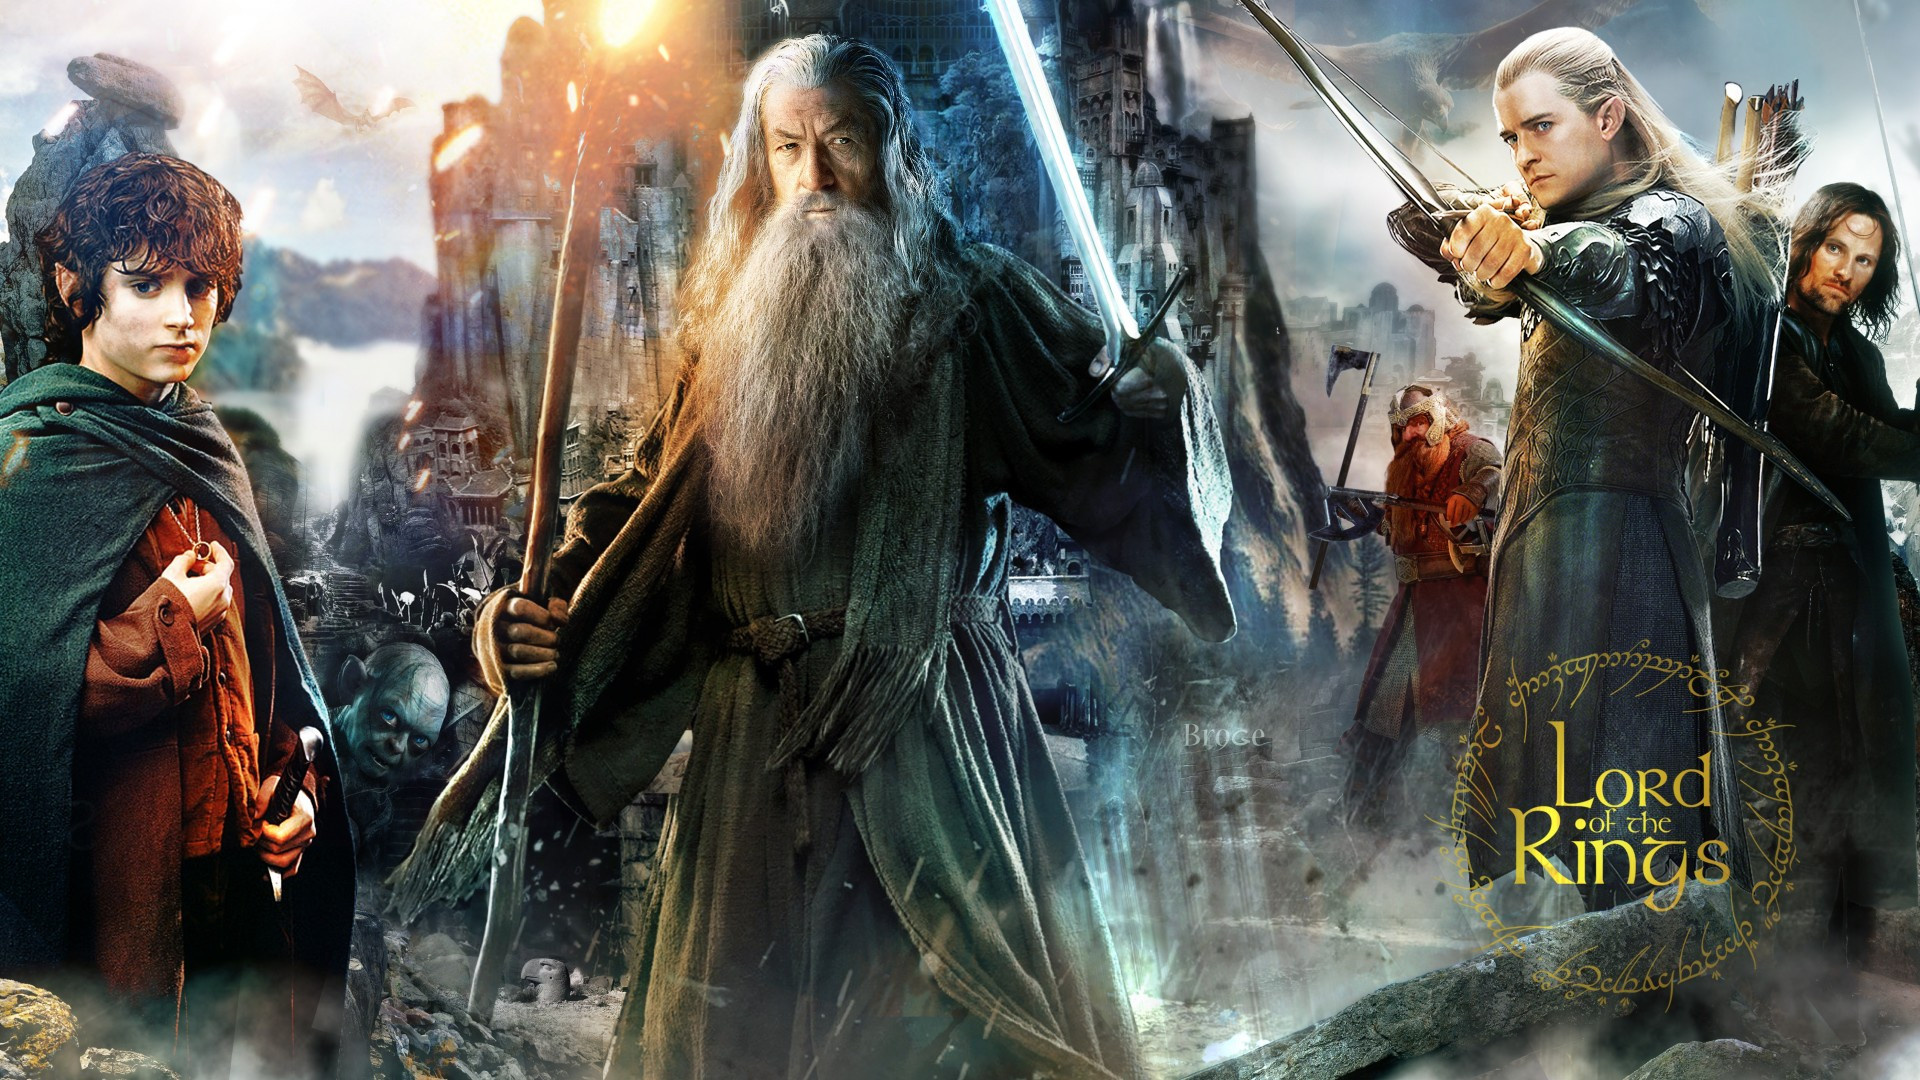 The Lord of the Rings, Gandalf the Wizard, Legolas the Elf, Widescreen wallpapers, 1920x1080 Full HD Desktop